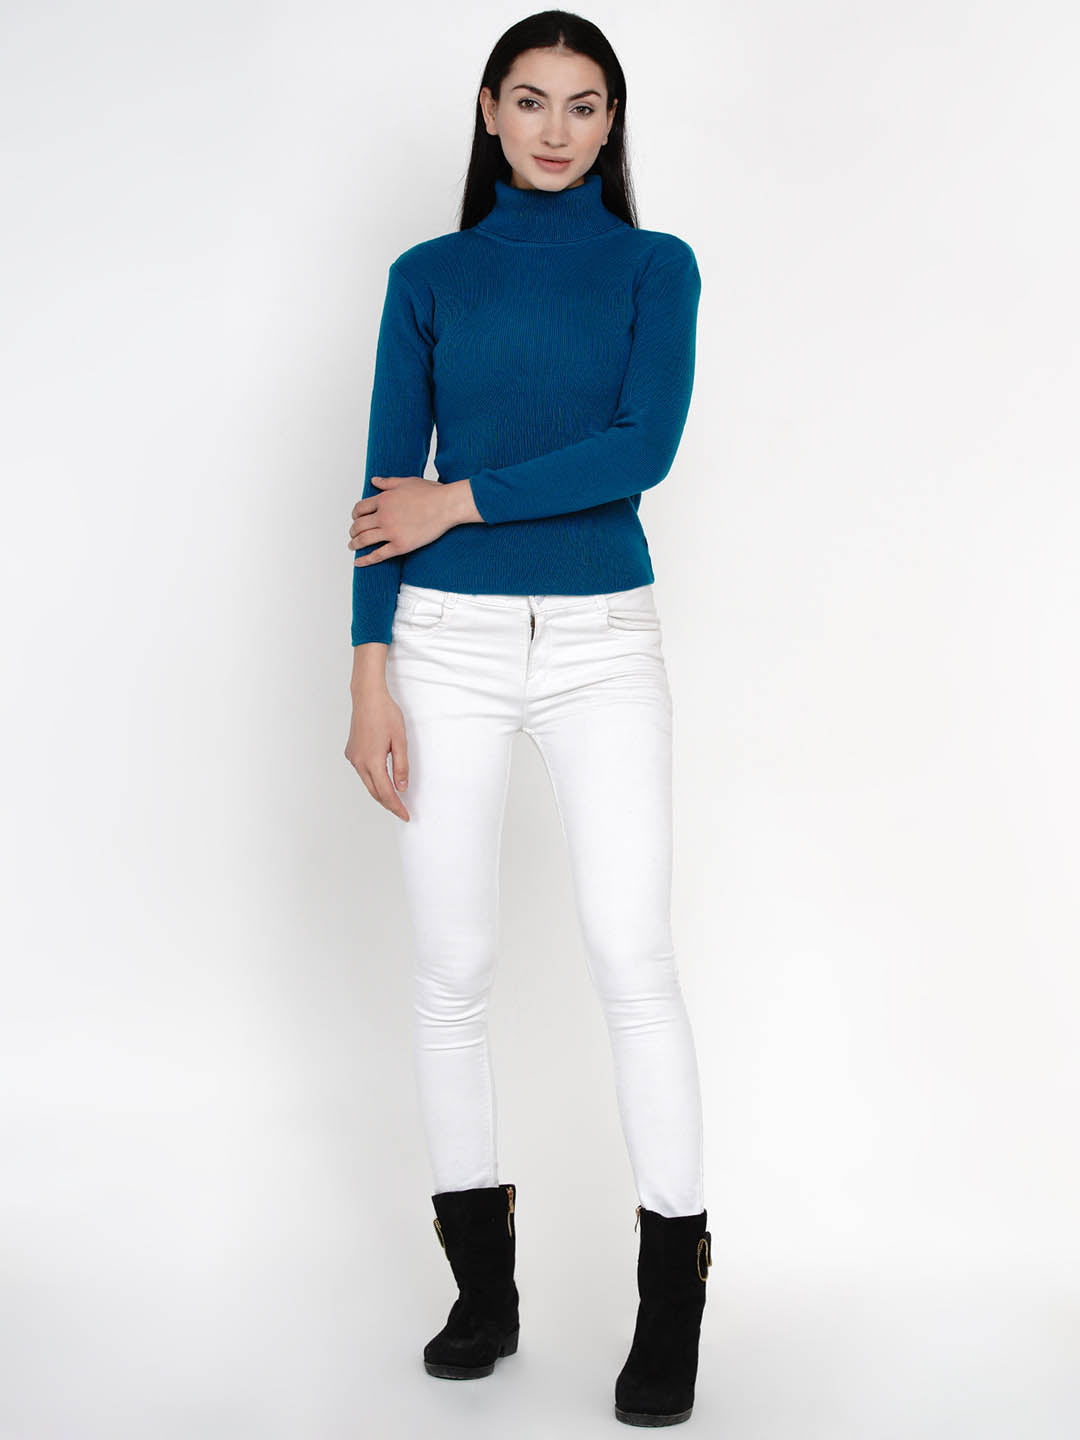 Turquoise Winter Acrylic High Neck Sweater